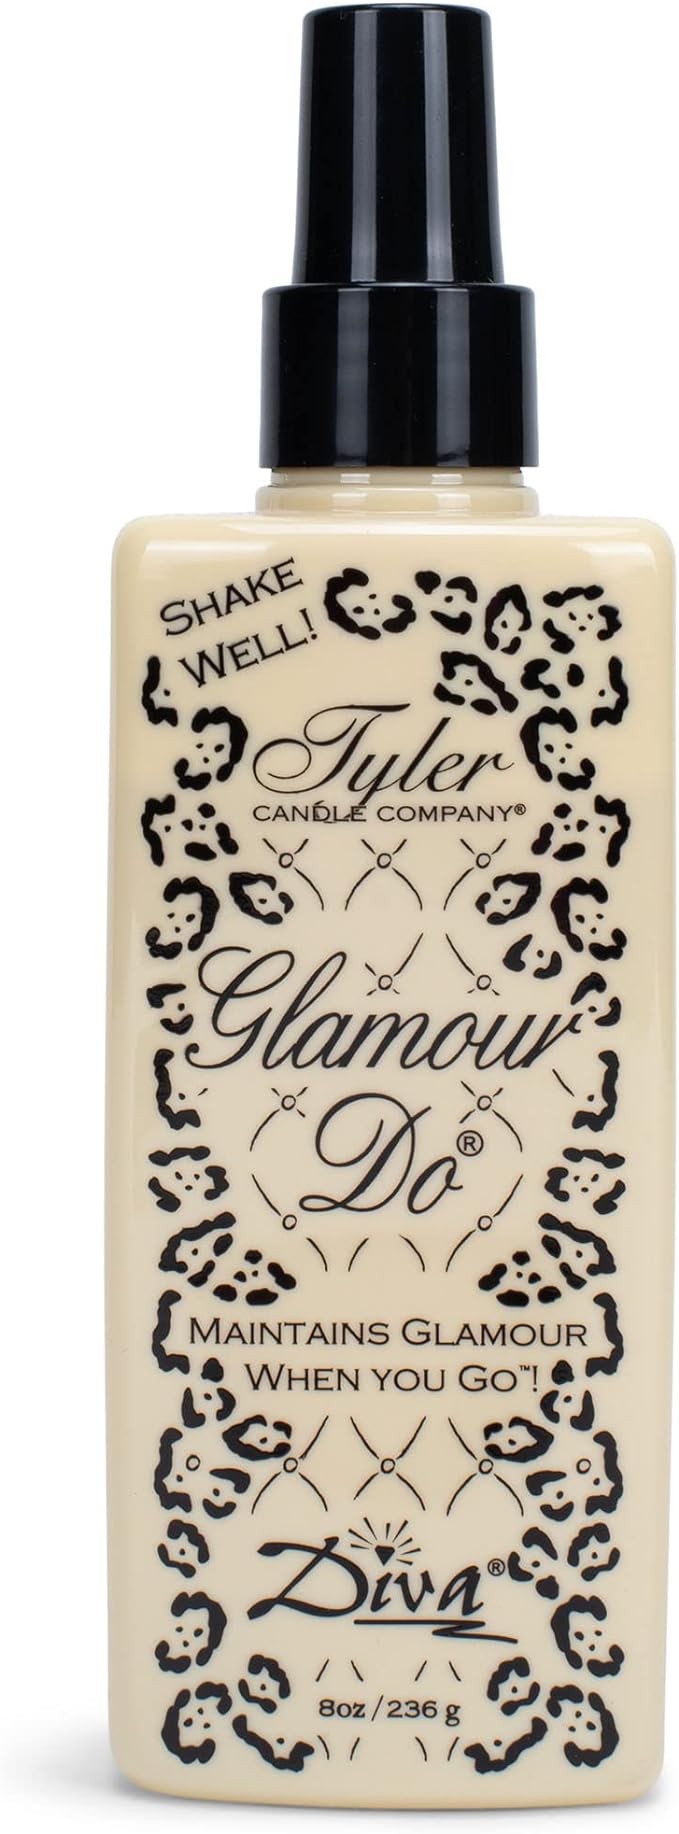 Tyler Candle Co. Glamour Do - 8oz.